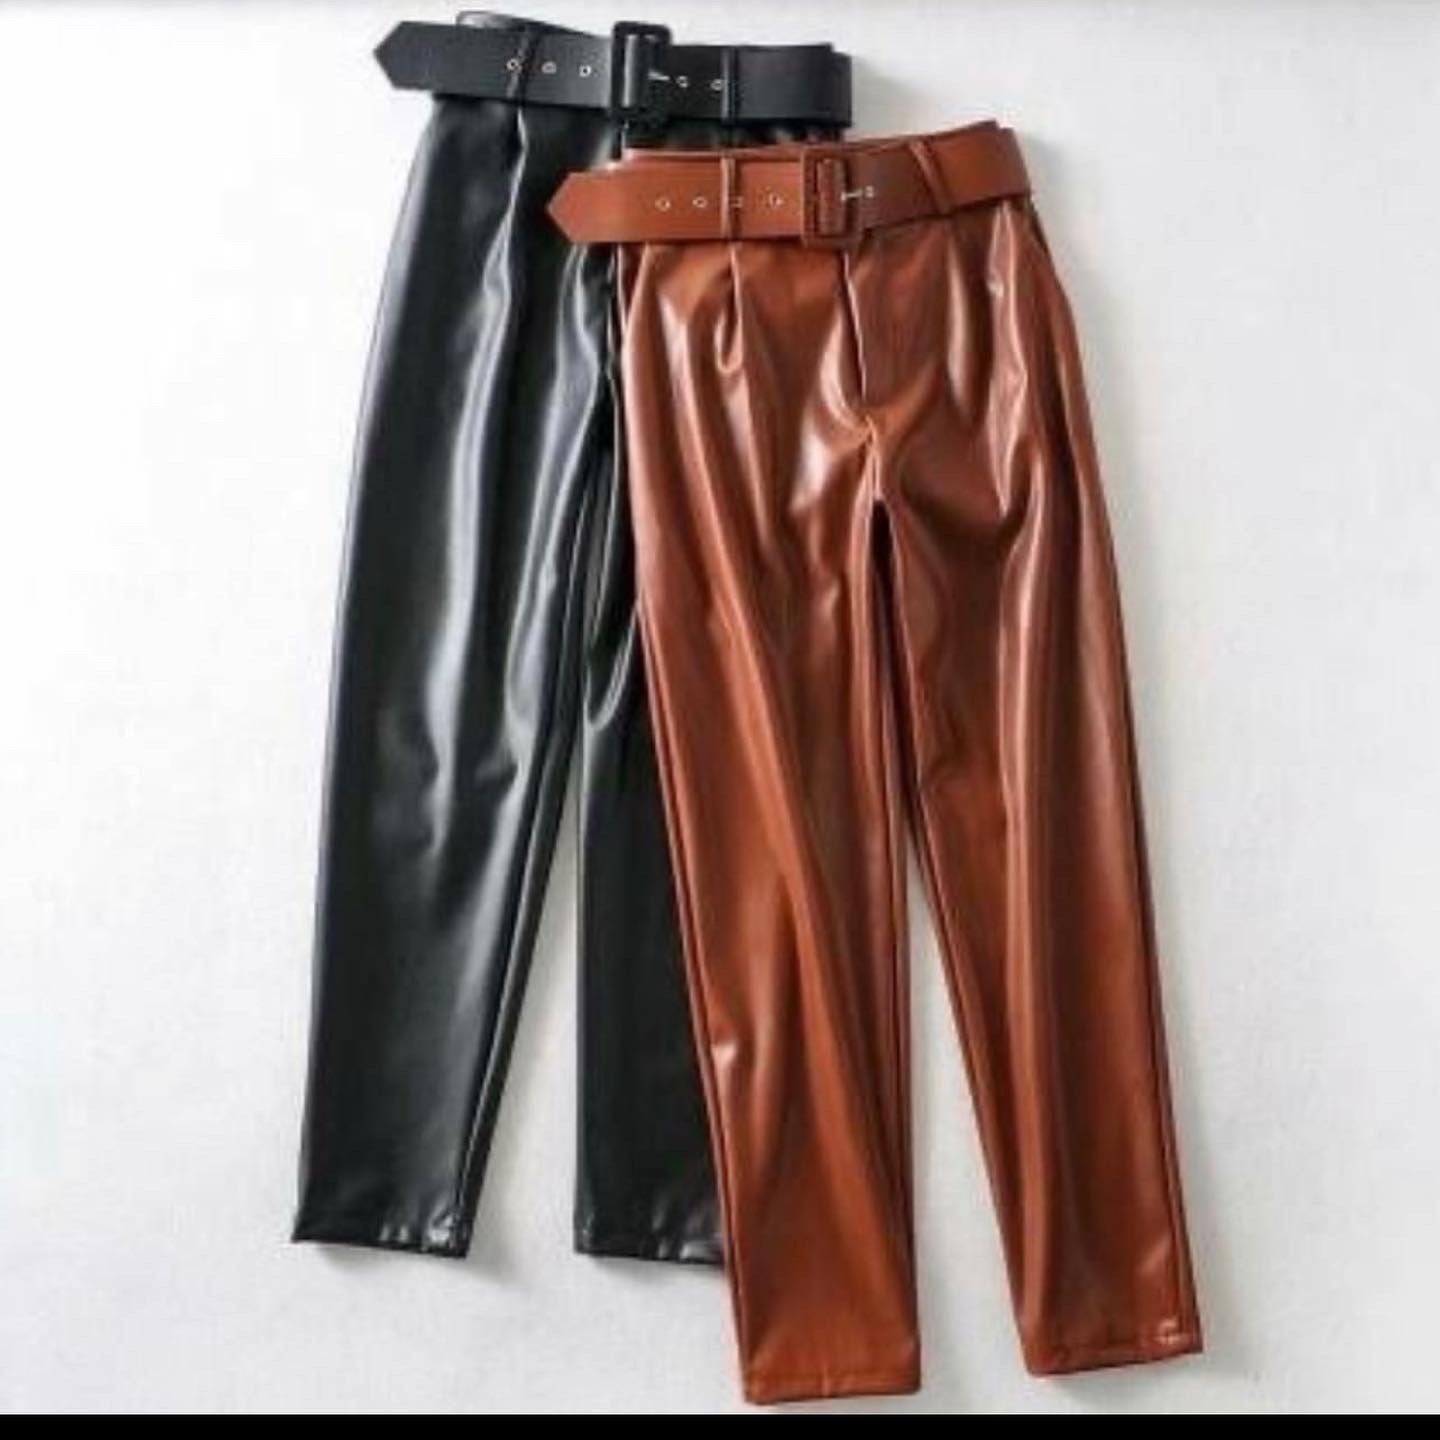 Shelly Pu Leather Pants With Belt